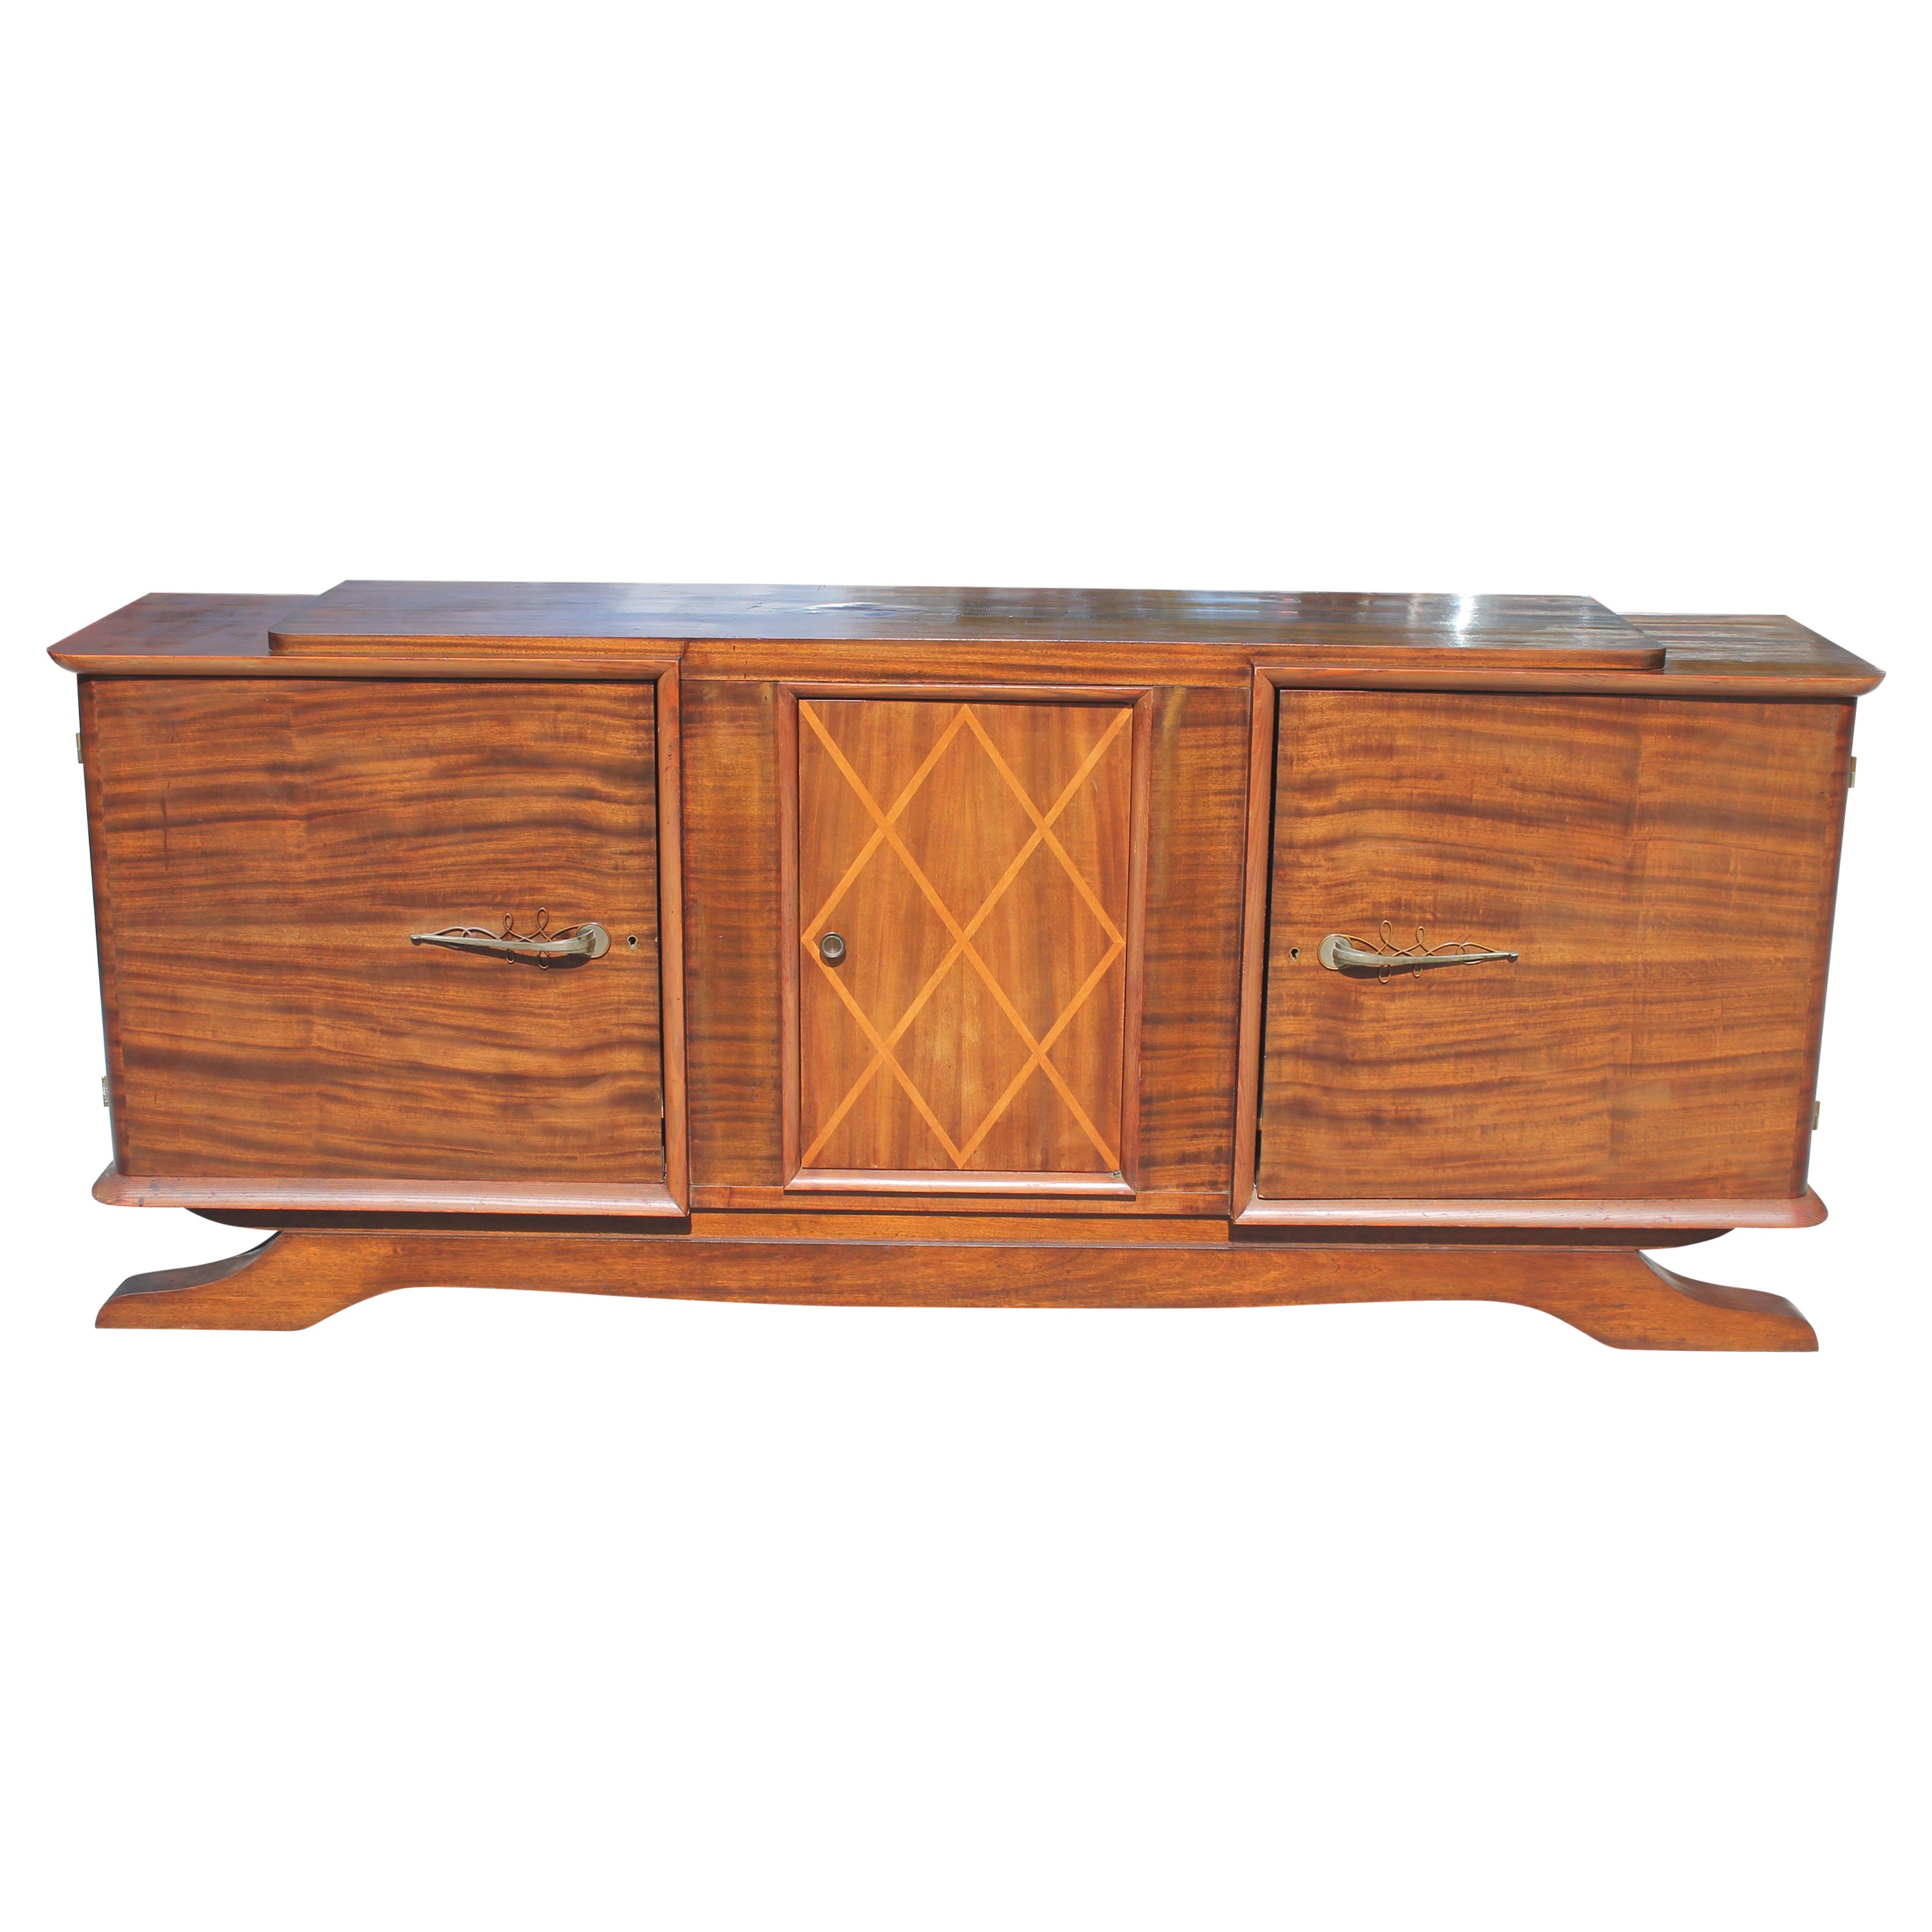 1930's French Art Deco Classic Exotic Walnut Buffet/ Sideboard/ Credenza For Sale